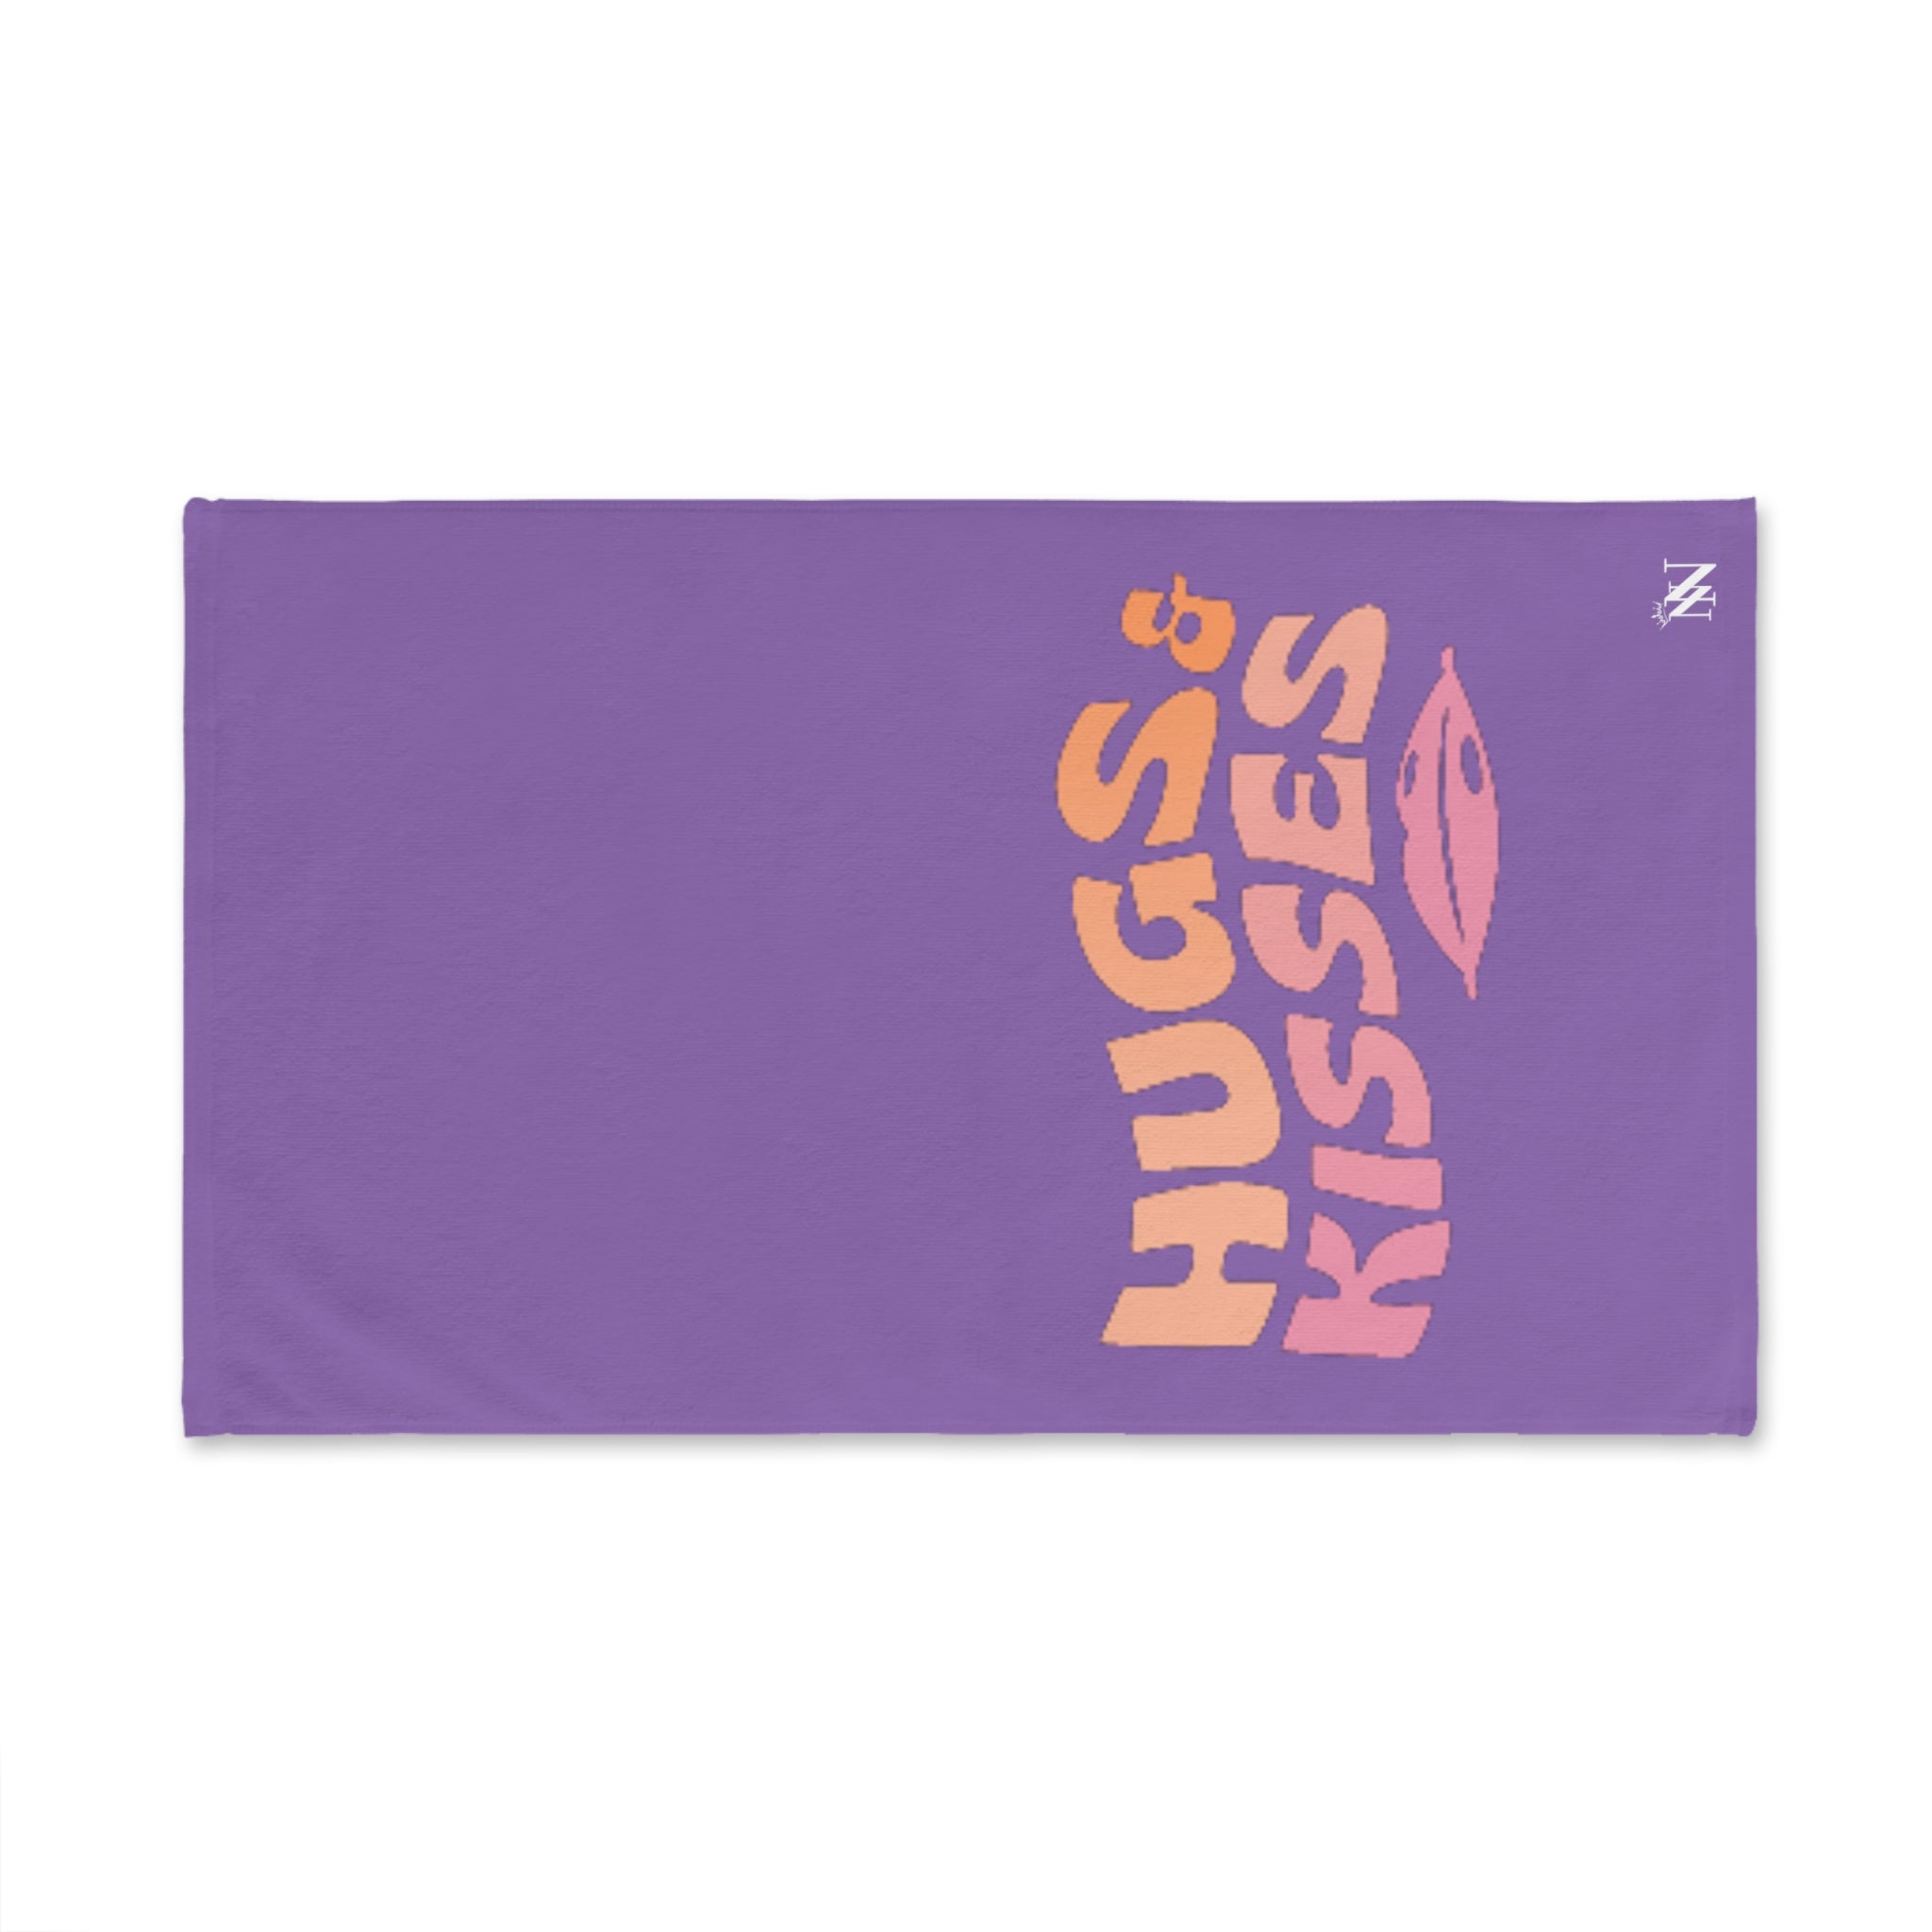 Hugs Kisses Kiss Lavendar | Funny Gifts for Men - Gifts for Him - Birthday Gifts for Men, Him, Husband, Boyfriend, New Couple Gifts, Fathers & Valentines Day Gifts, Hand Towels NECTAR NAPKINS